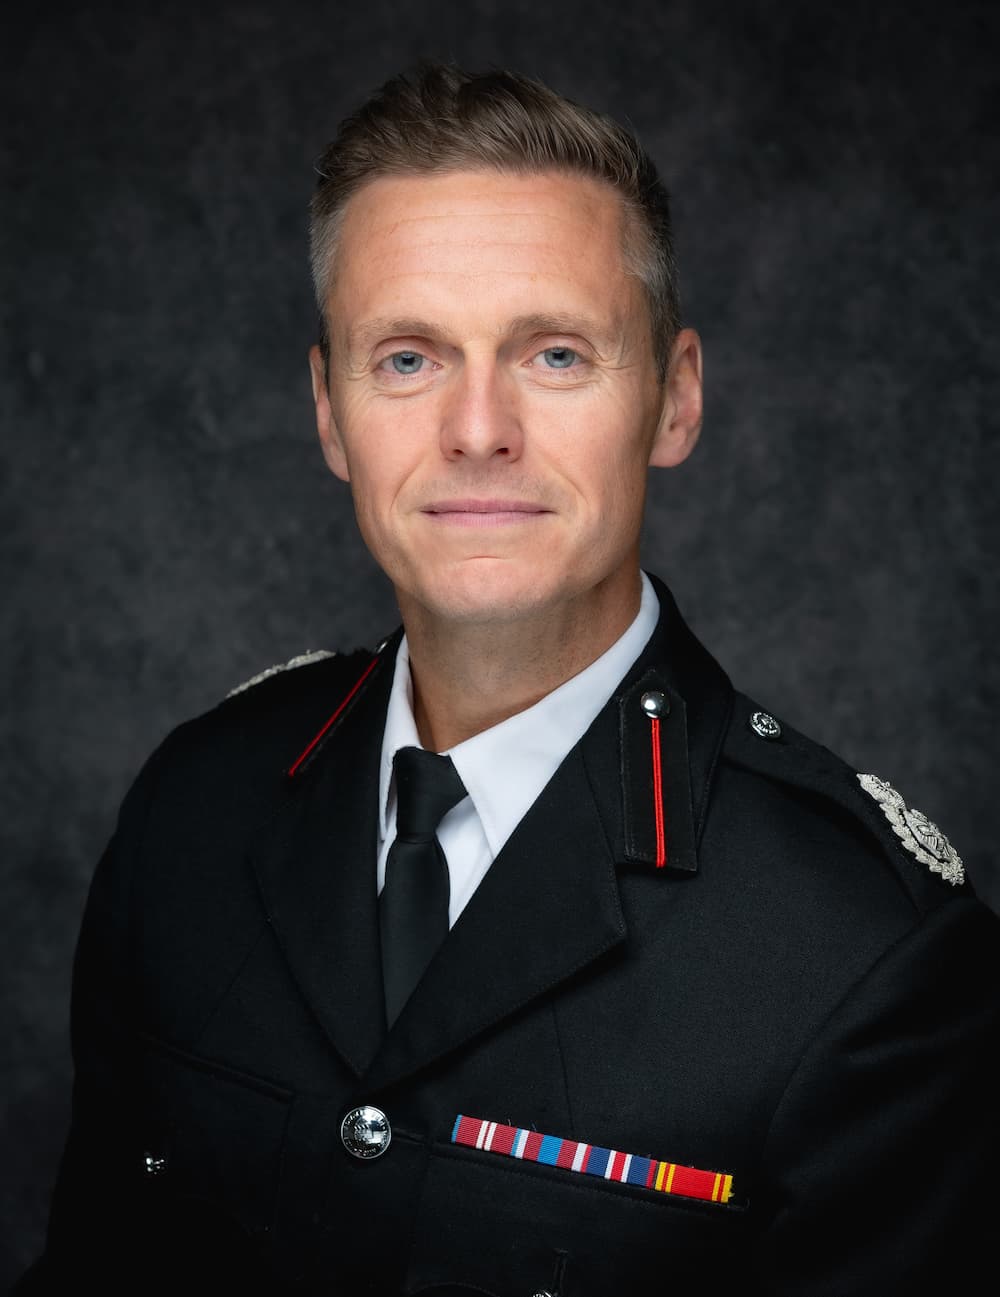 Assistant Chief Fire Officer Simon Barry - Director for Enabling Services